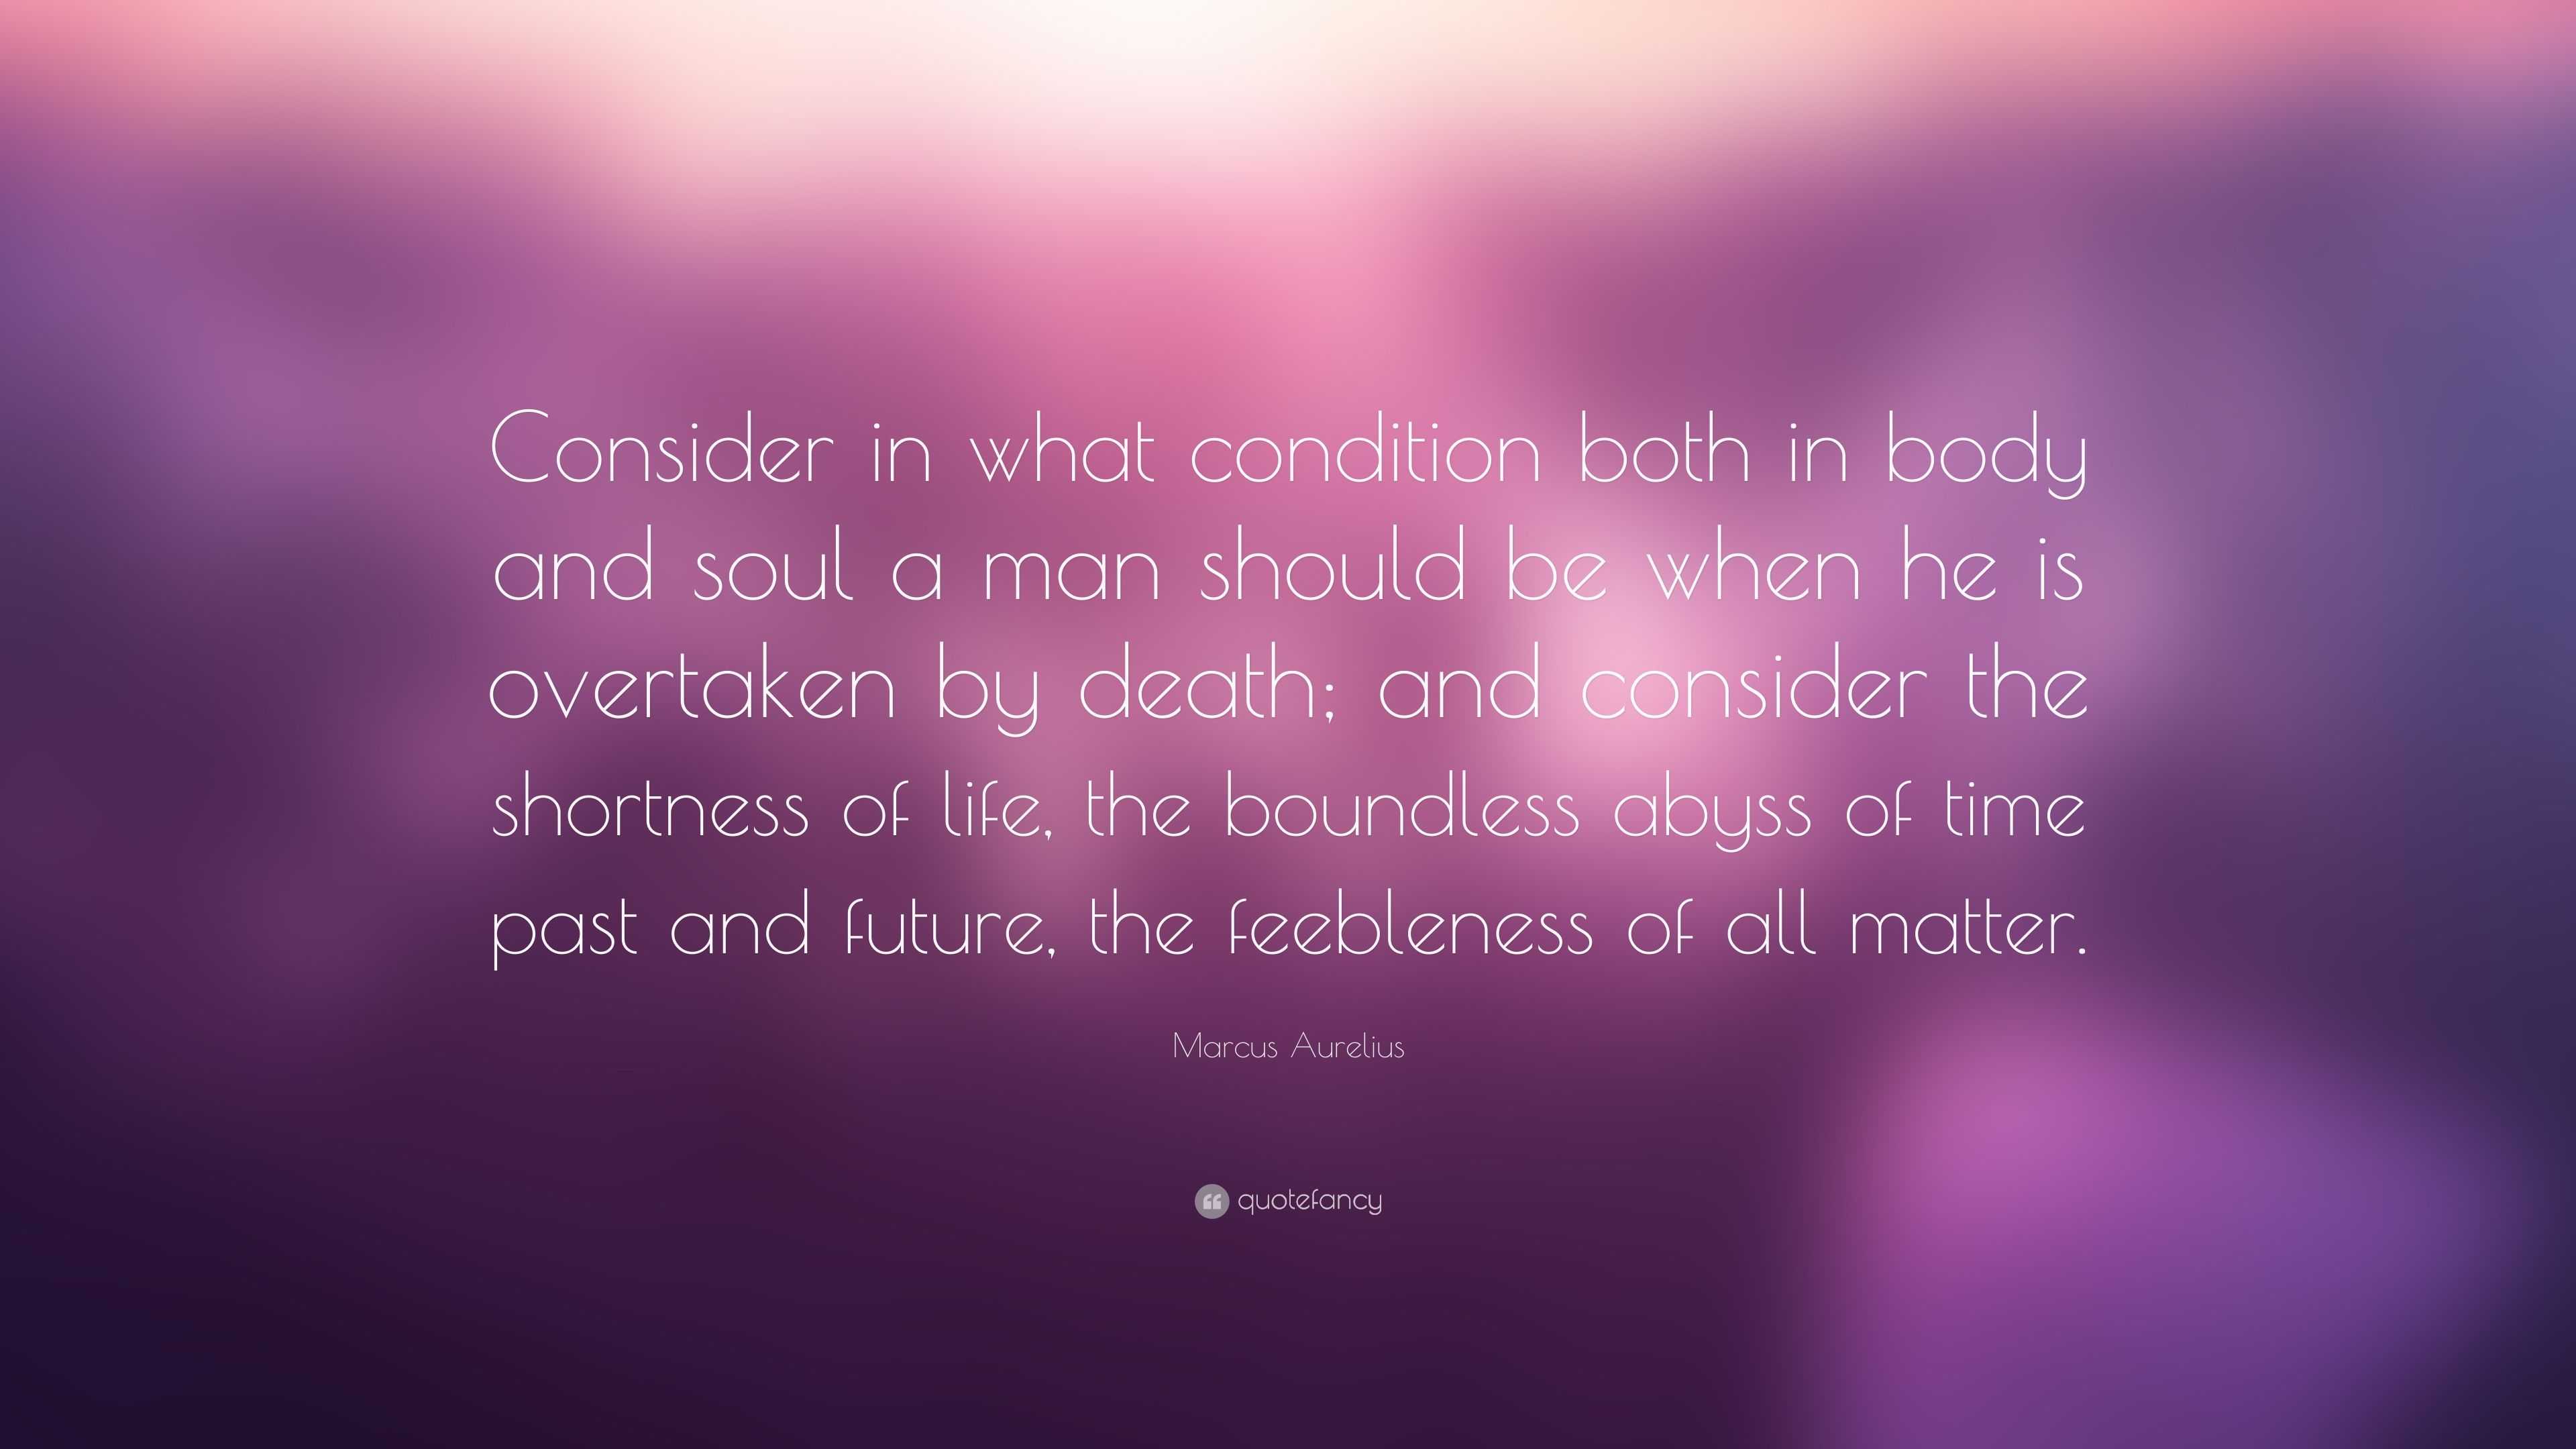 Marcus Aurelius Quote “Consider in what condition both in body and soul a man